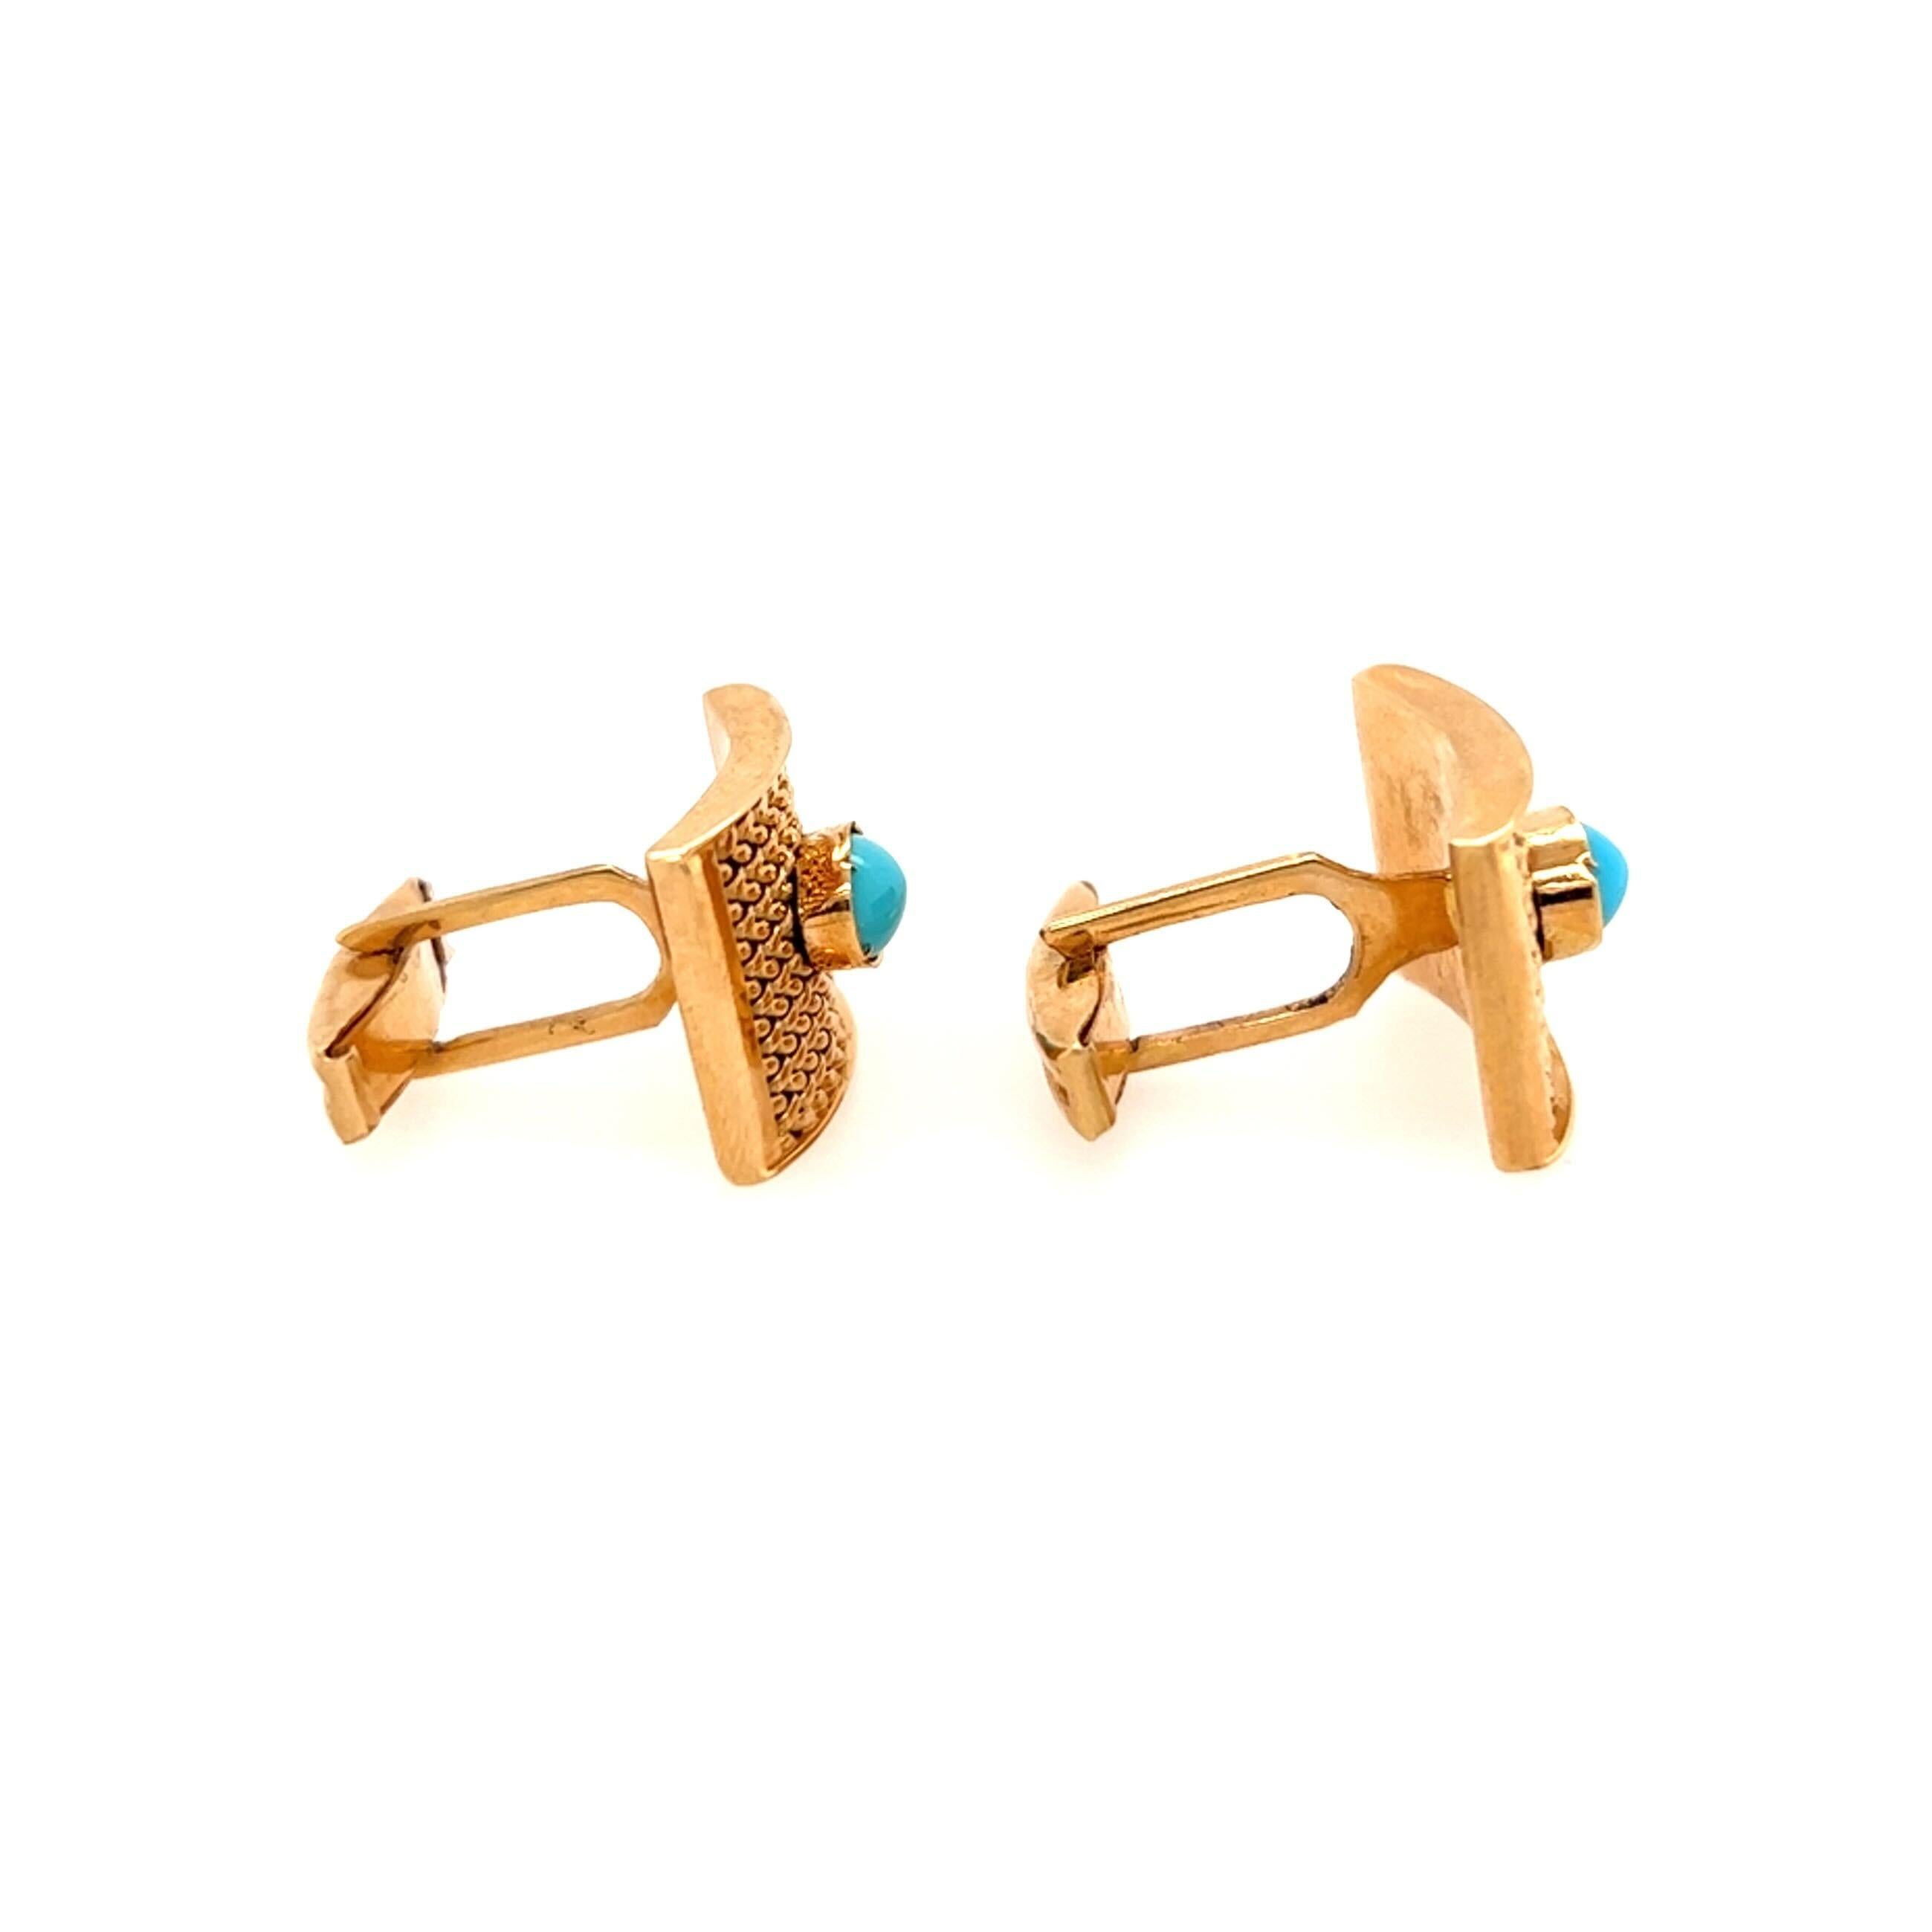 Cabochon Pair of 18 Karat Yellow Gold and Turquoise Cufflinks